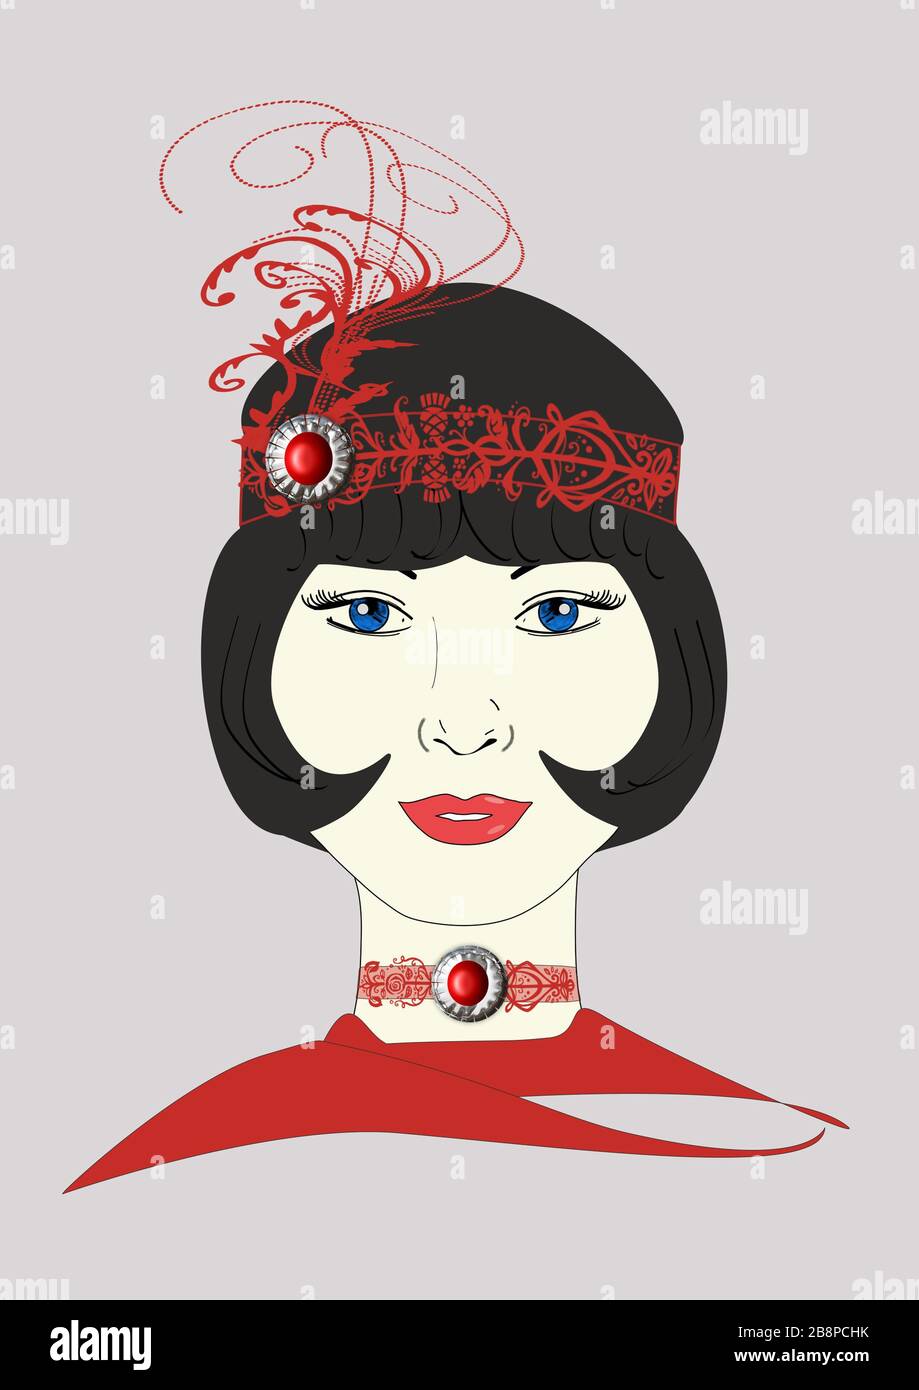 A graphic illustration of a 1920s Flapper in an ornate red headpiece. Stock Photo